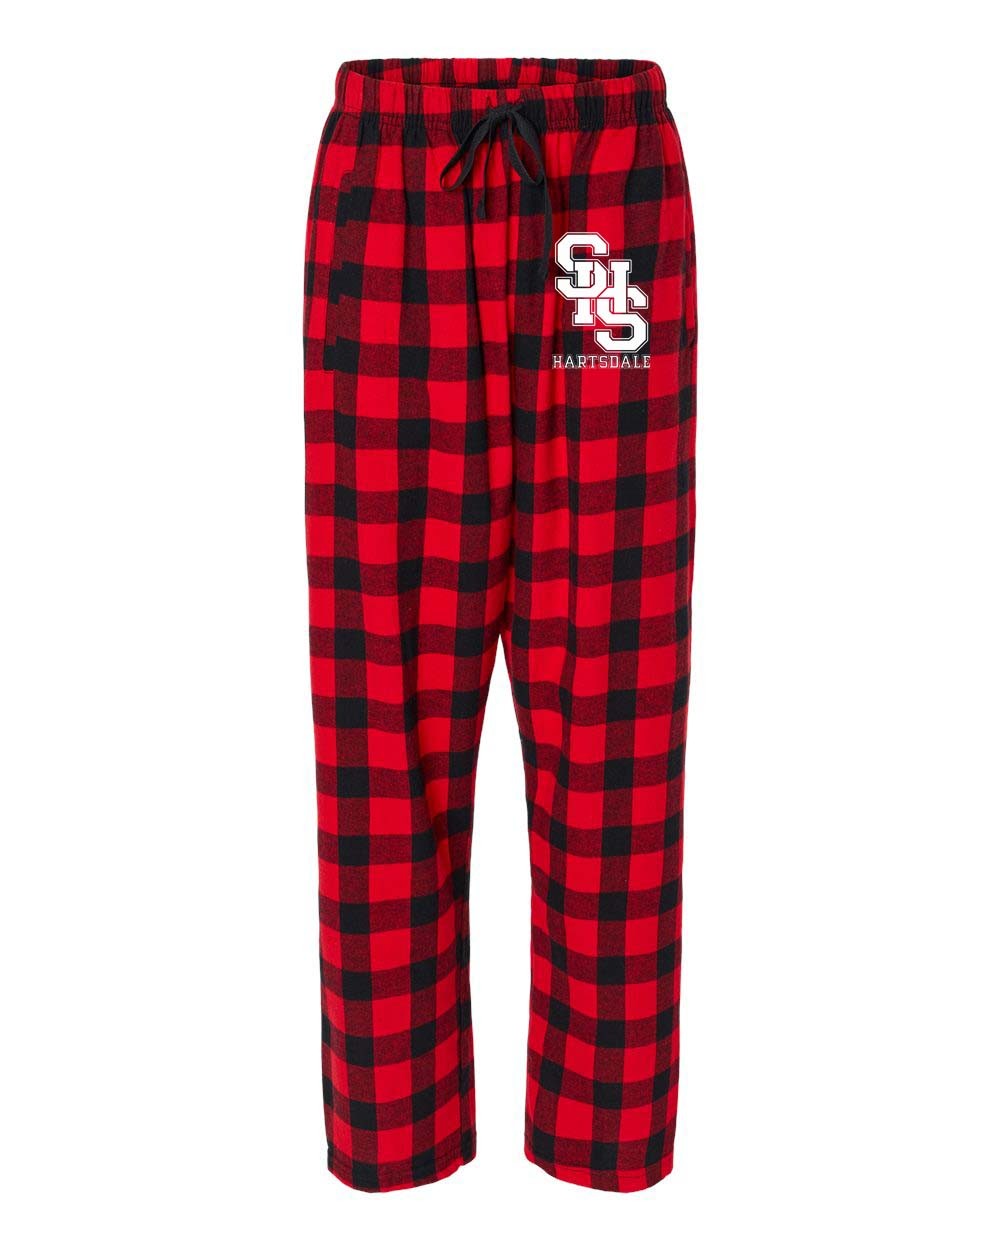 SHS Staff Women's Pajama Pants w/ White Logo - Please Allow 2-3 Weeks for Delivery